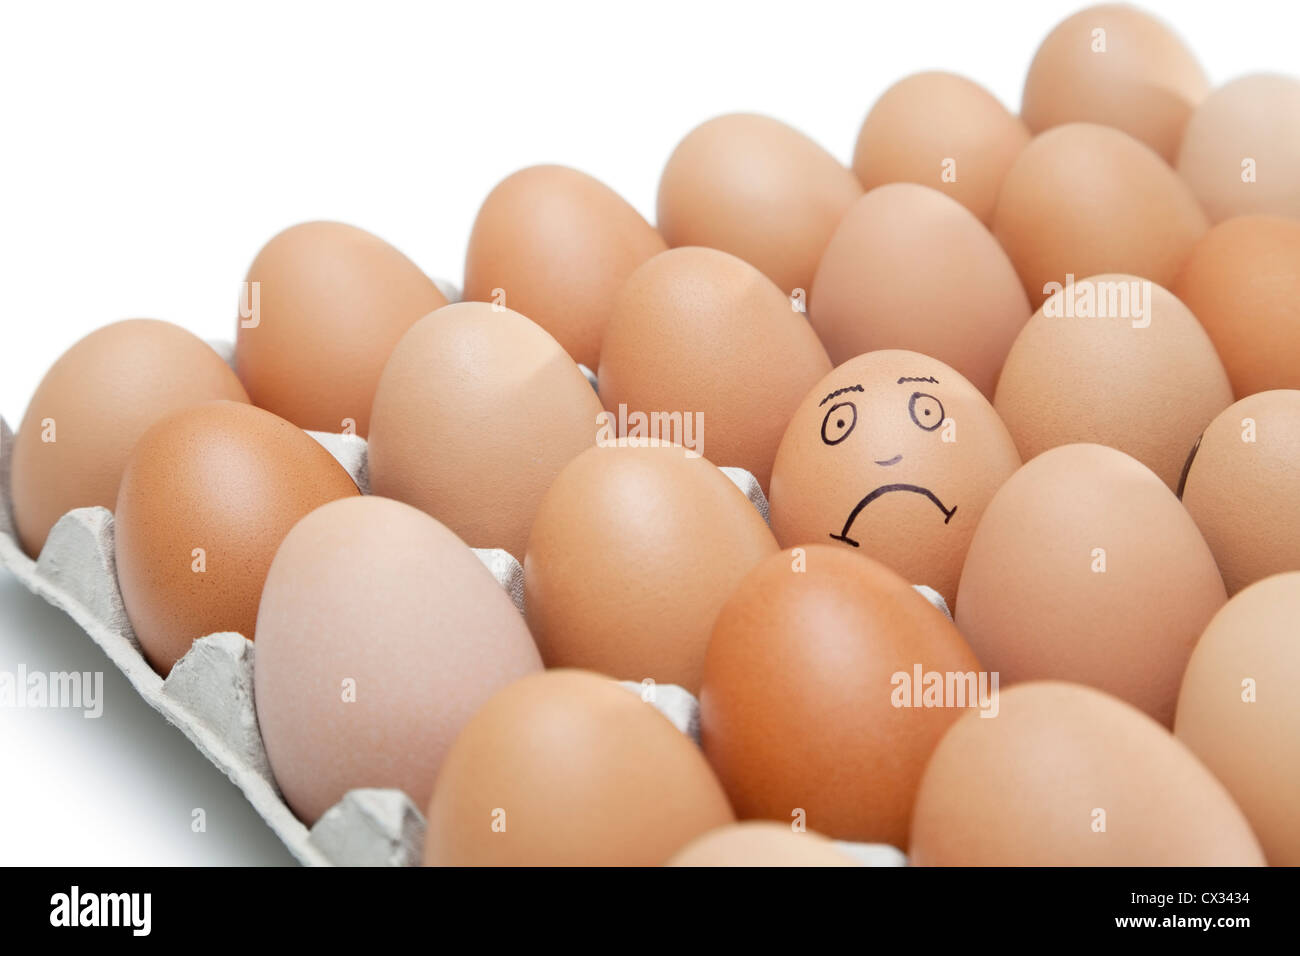 Sad face drawn on an egg surrounded by plain brown eggs in carton against white background Stock Photo